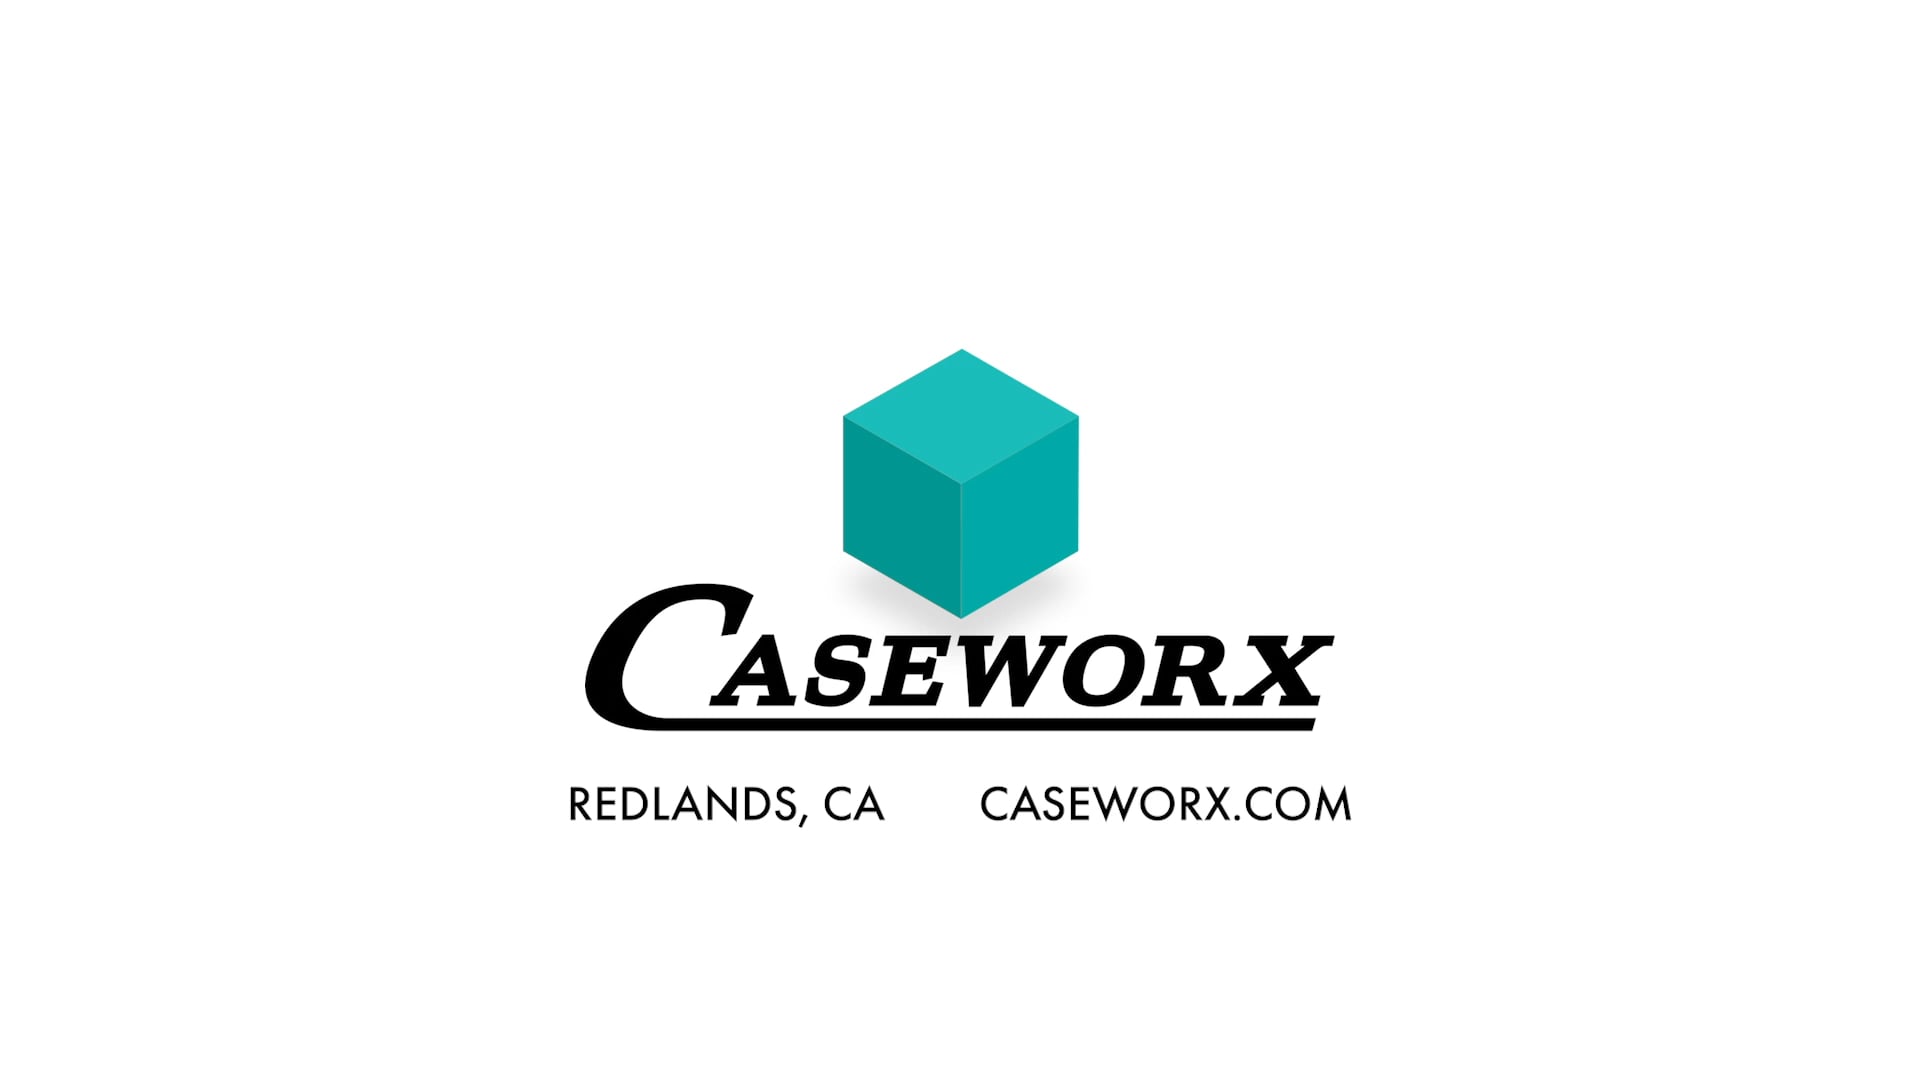 About Caseworx, Inc